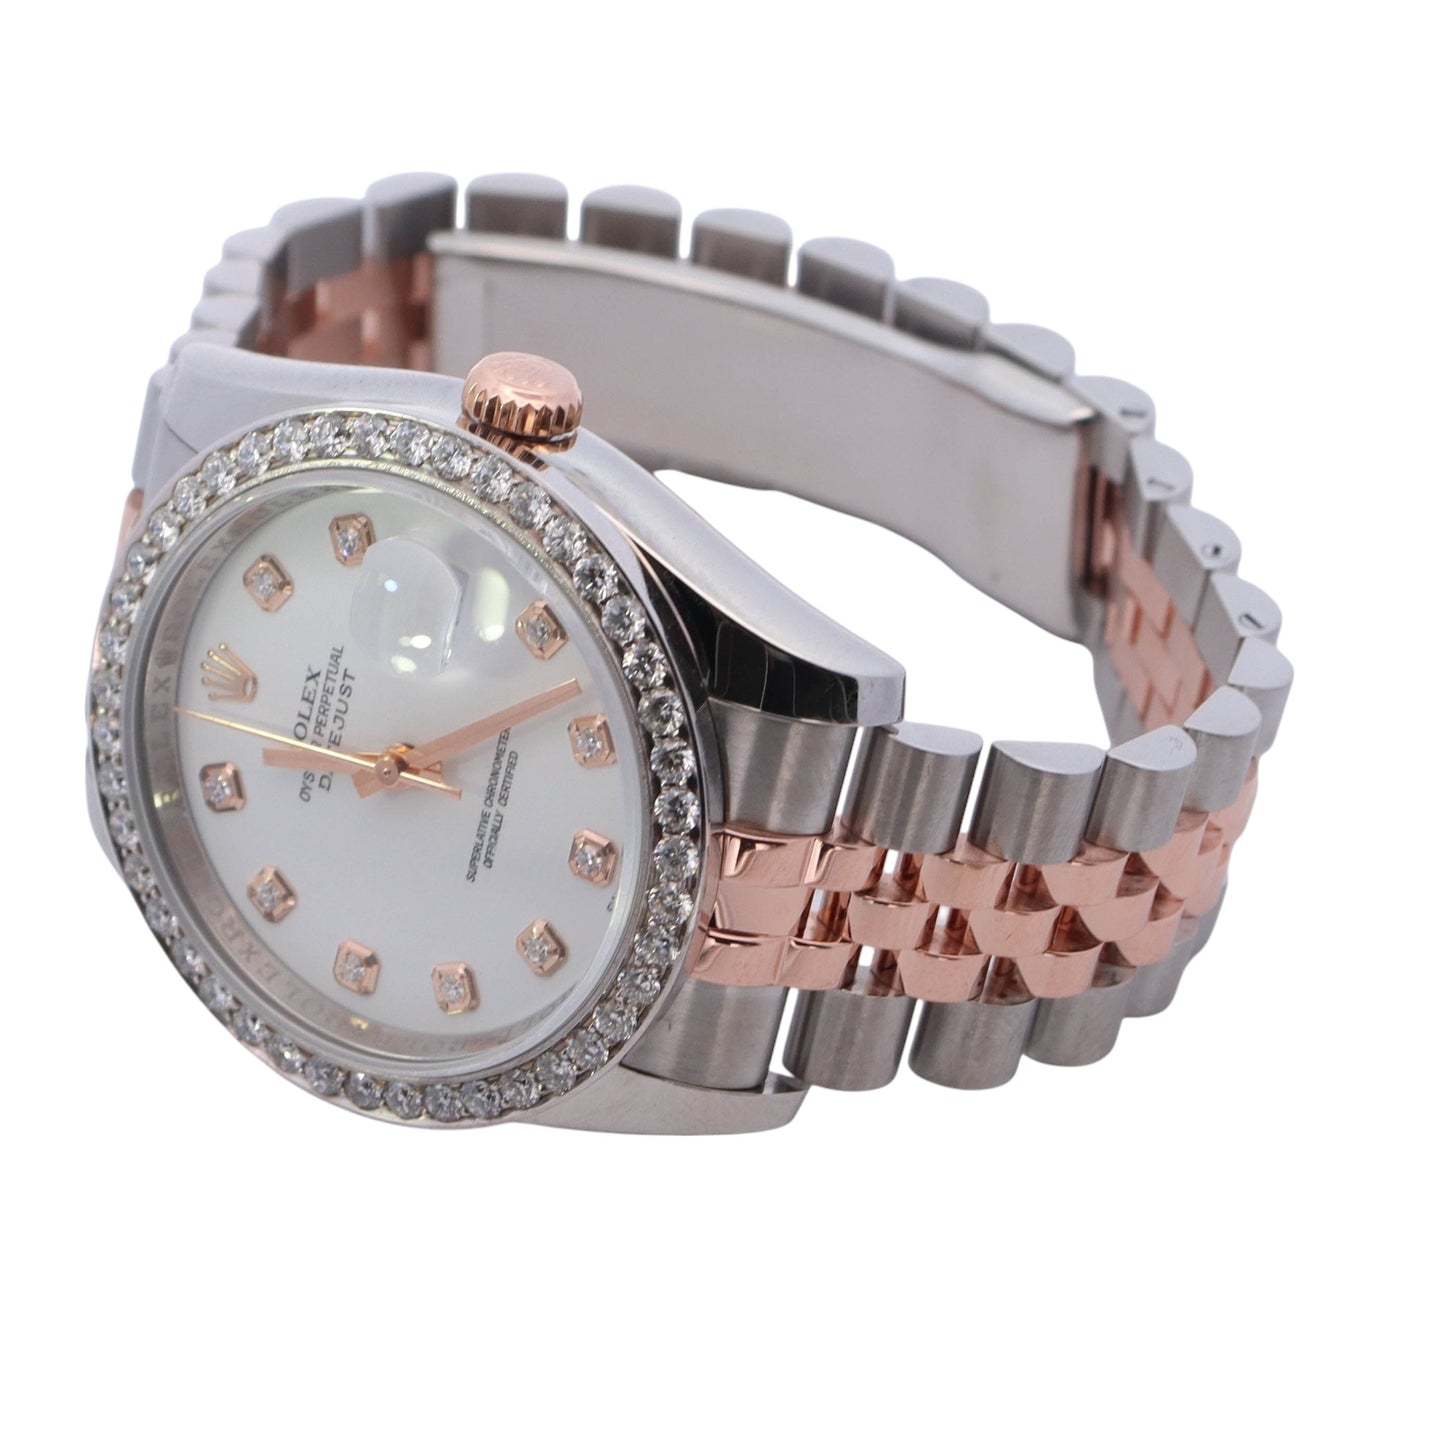 Rolex Datejust Two Tone Rose Gold & Stainless Steel 36mm White Diamond dot Dial Watch Reference #: 116231 - Happy Jewelers Fine Jewelry Lifetime Warranty